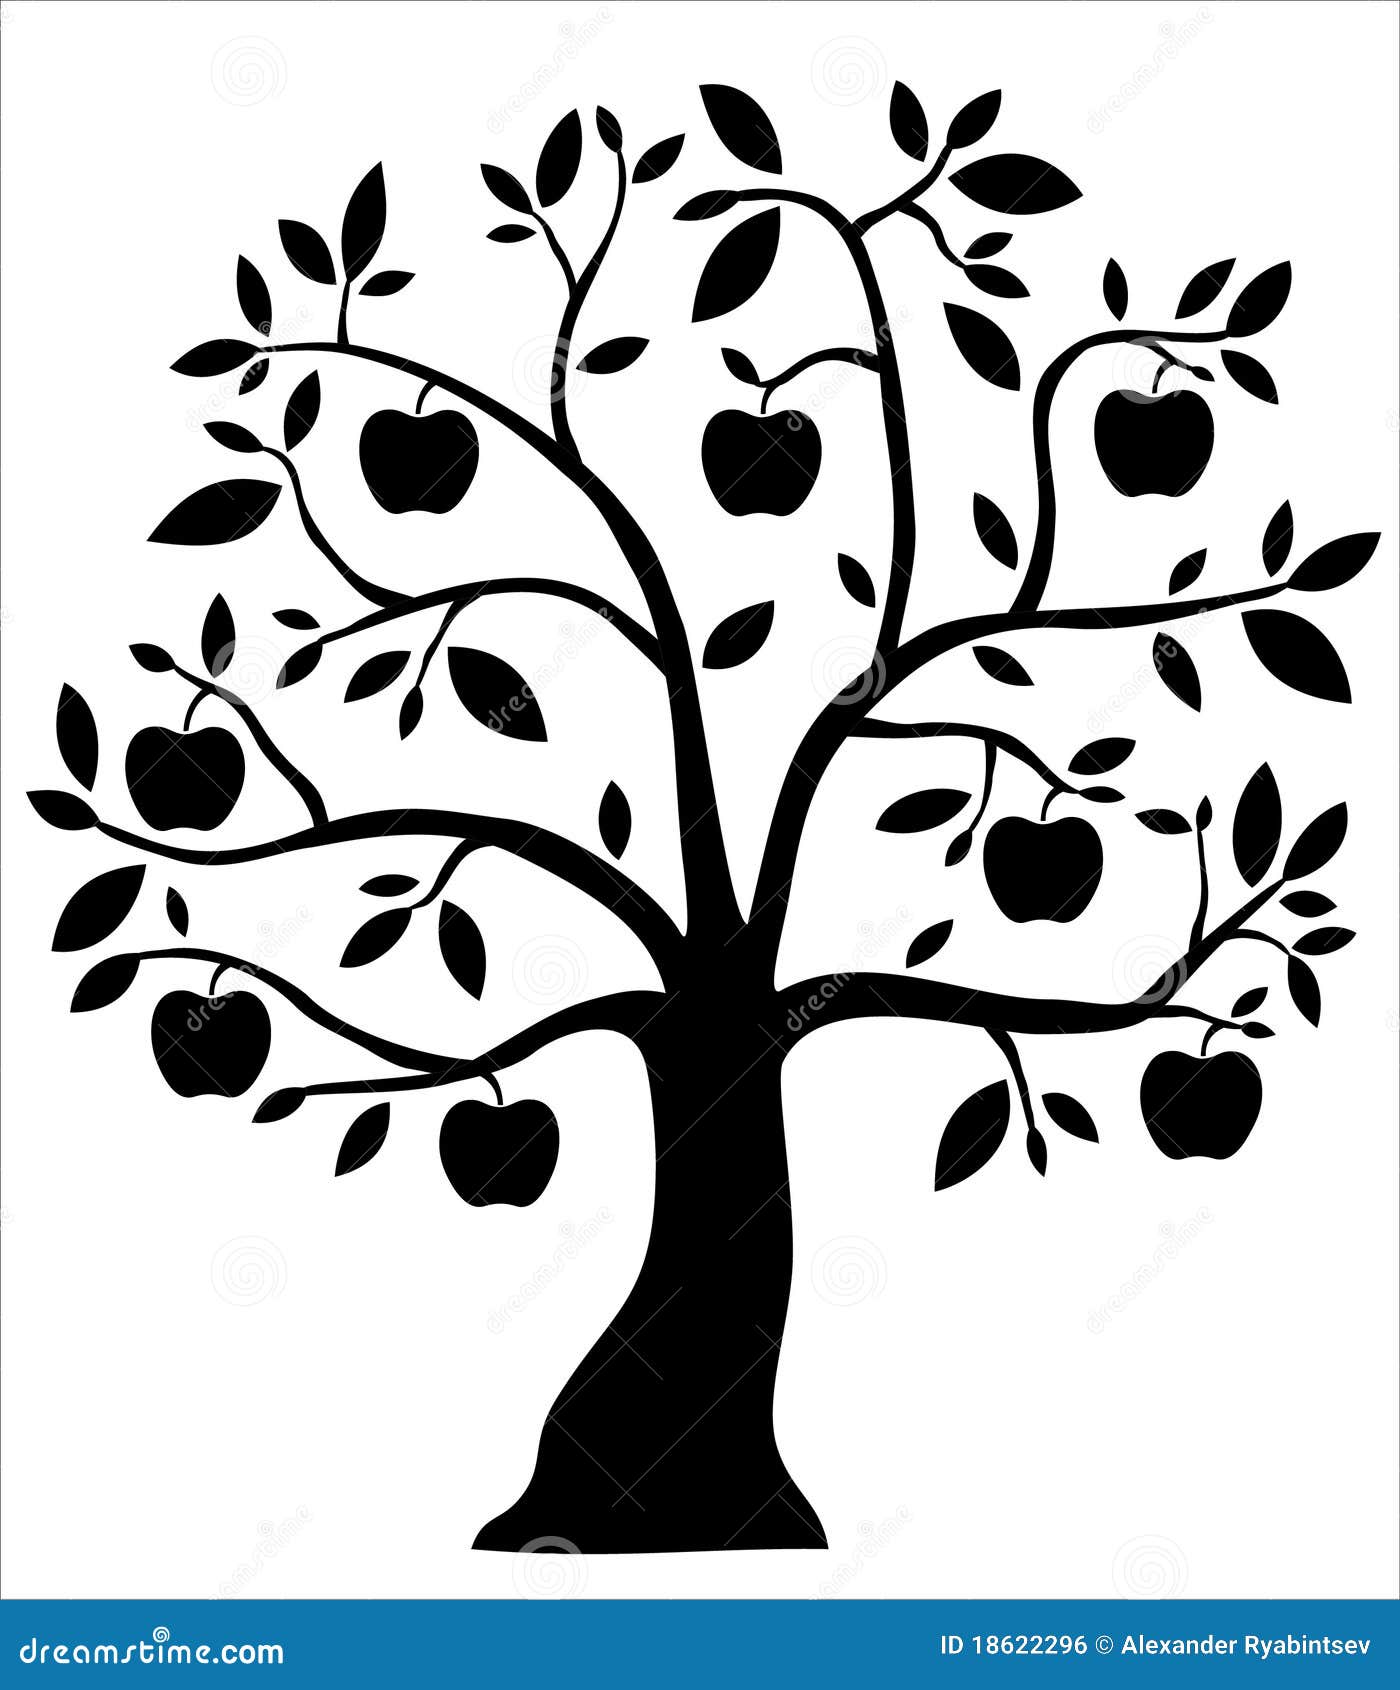 apple tree clipart black and white - photo #33